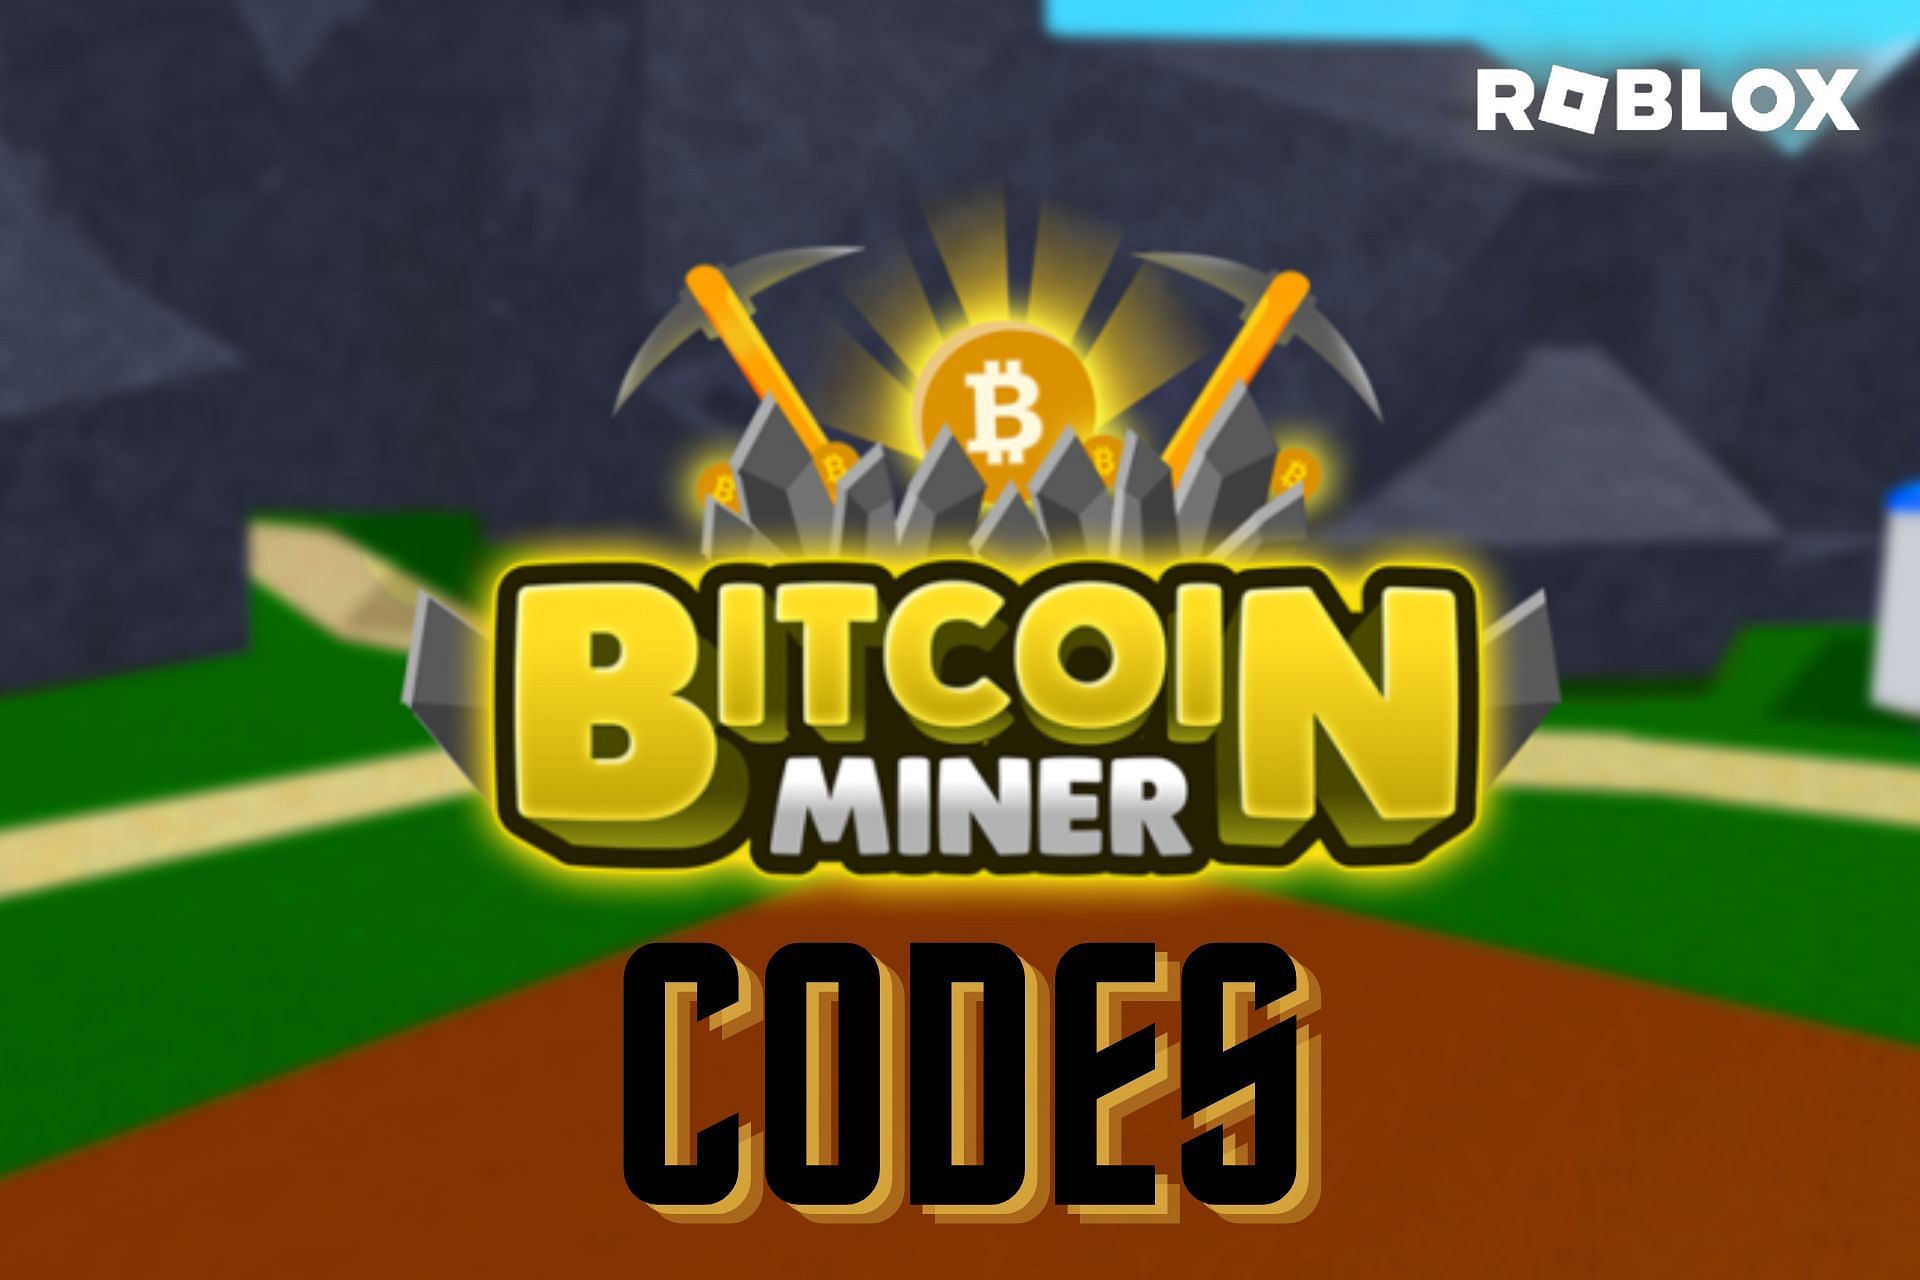 Roblox Bitcoin Miner codes in November 2022: Free hedges, mining boosts,  and more